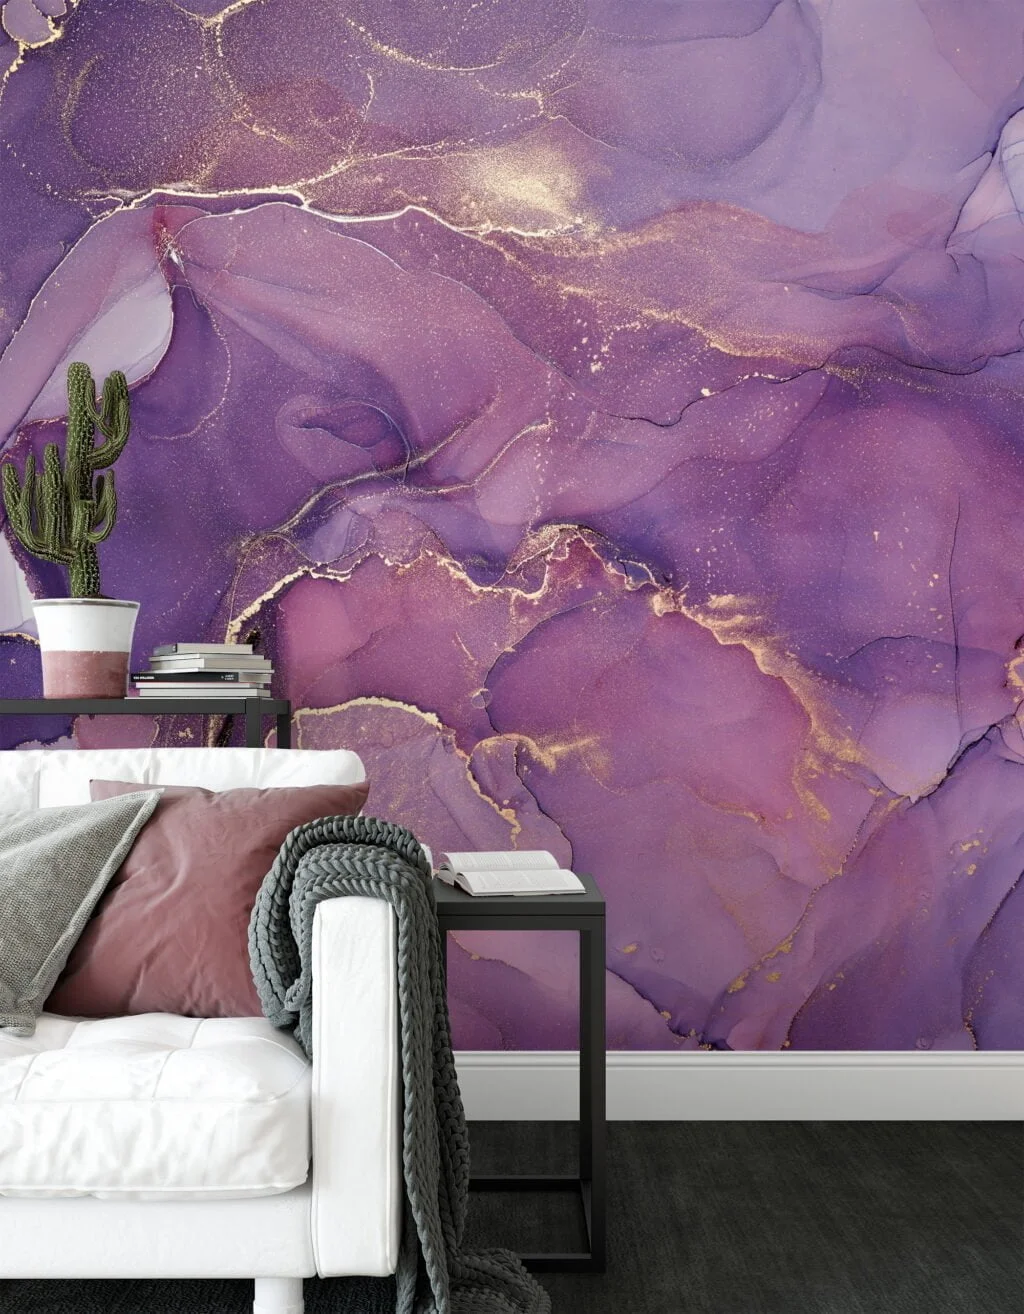 Pink and Purple Shades Marble Patterned Wallpaper - Removable Self-Adhesive Peel & Stick Wall Mural for Whimsical Home Decor